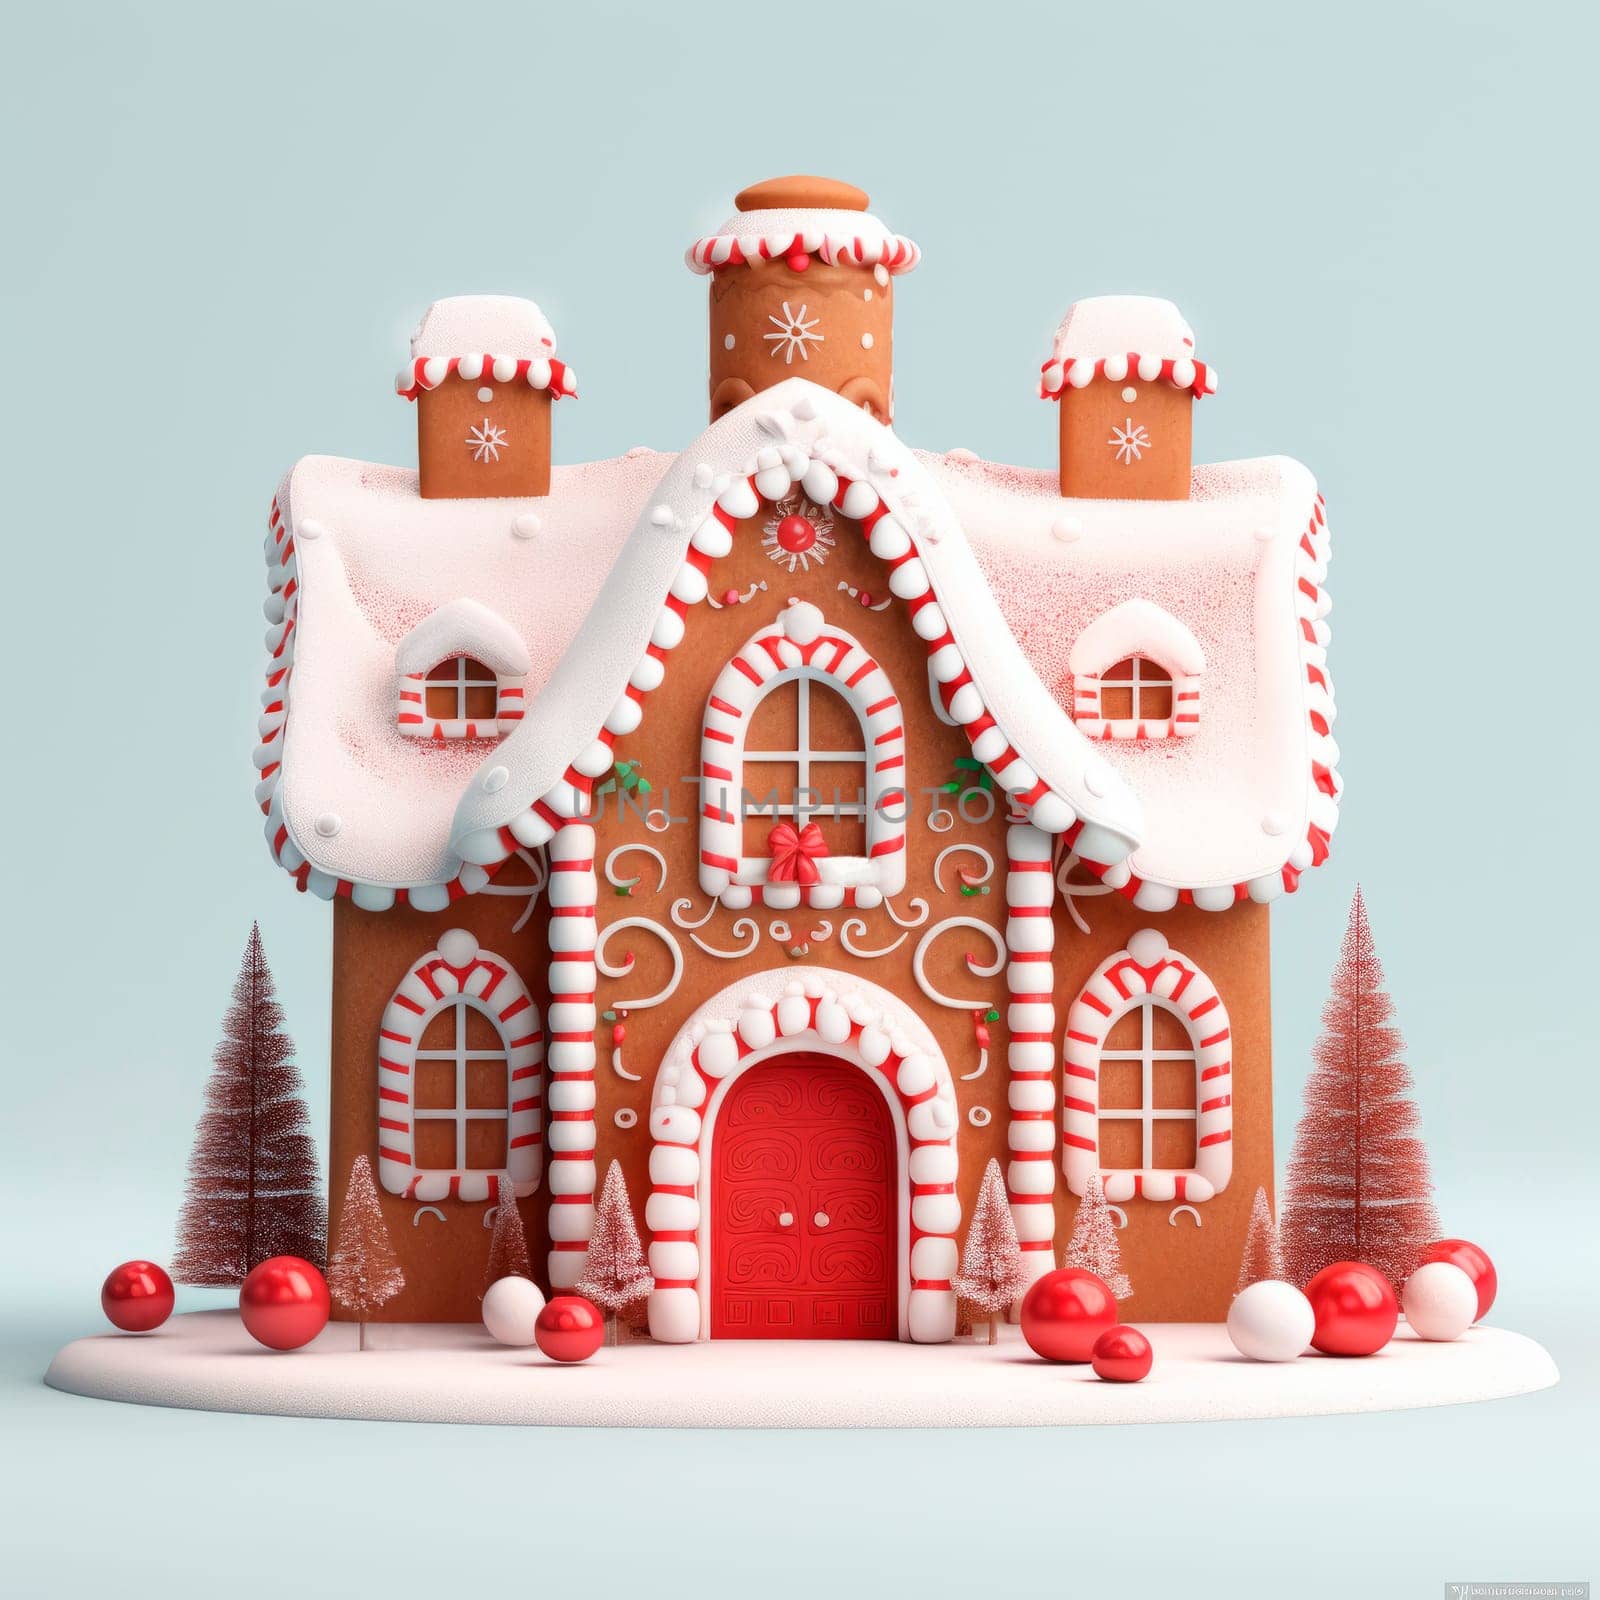 A beautiful gingerbread house on a delicate light background by Spirina